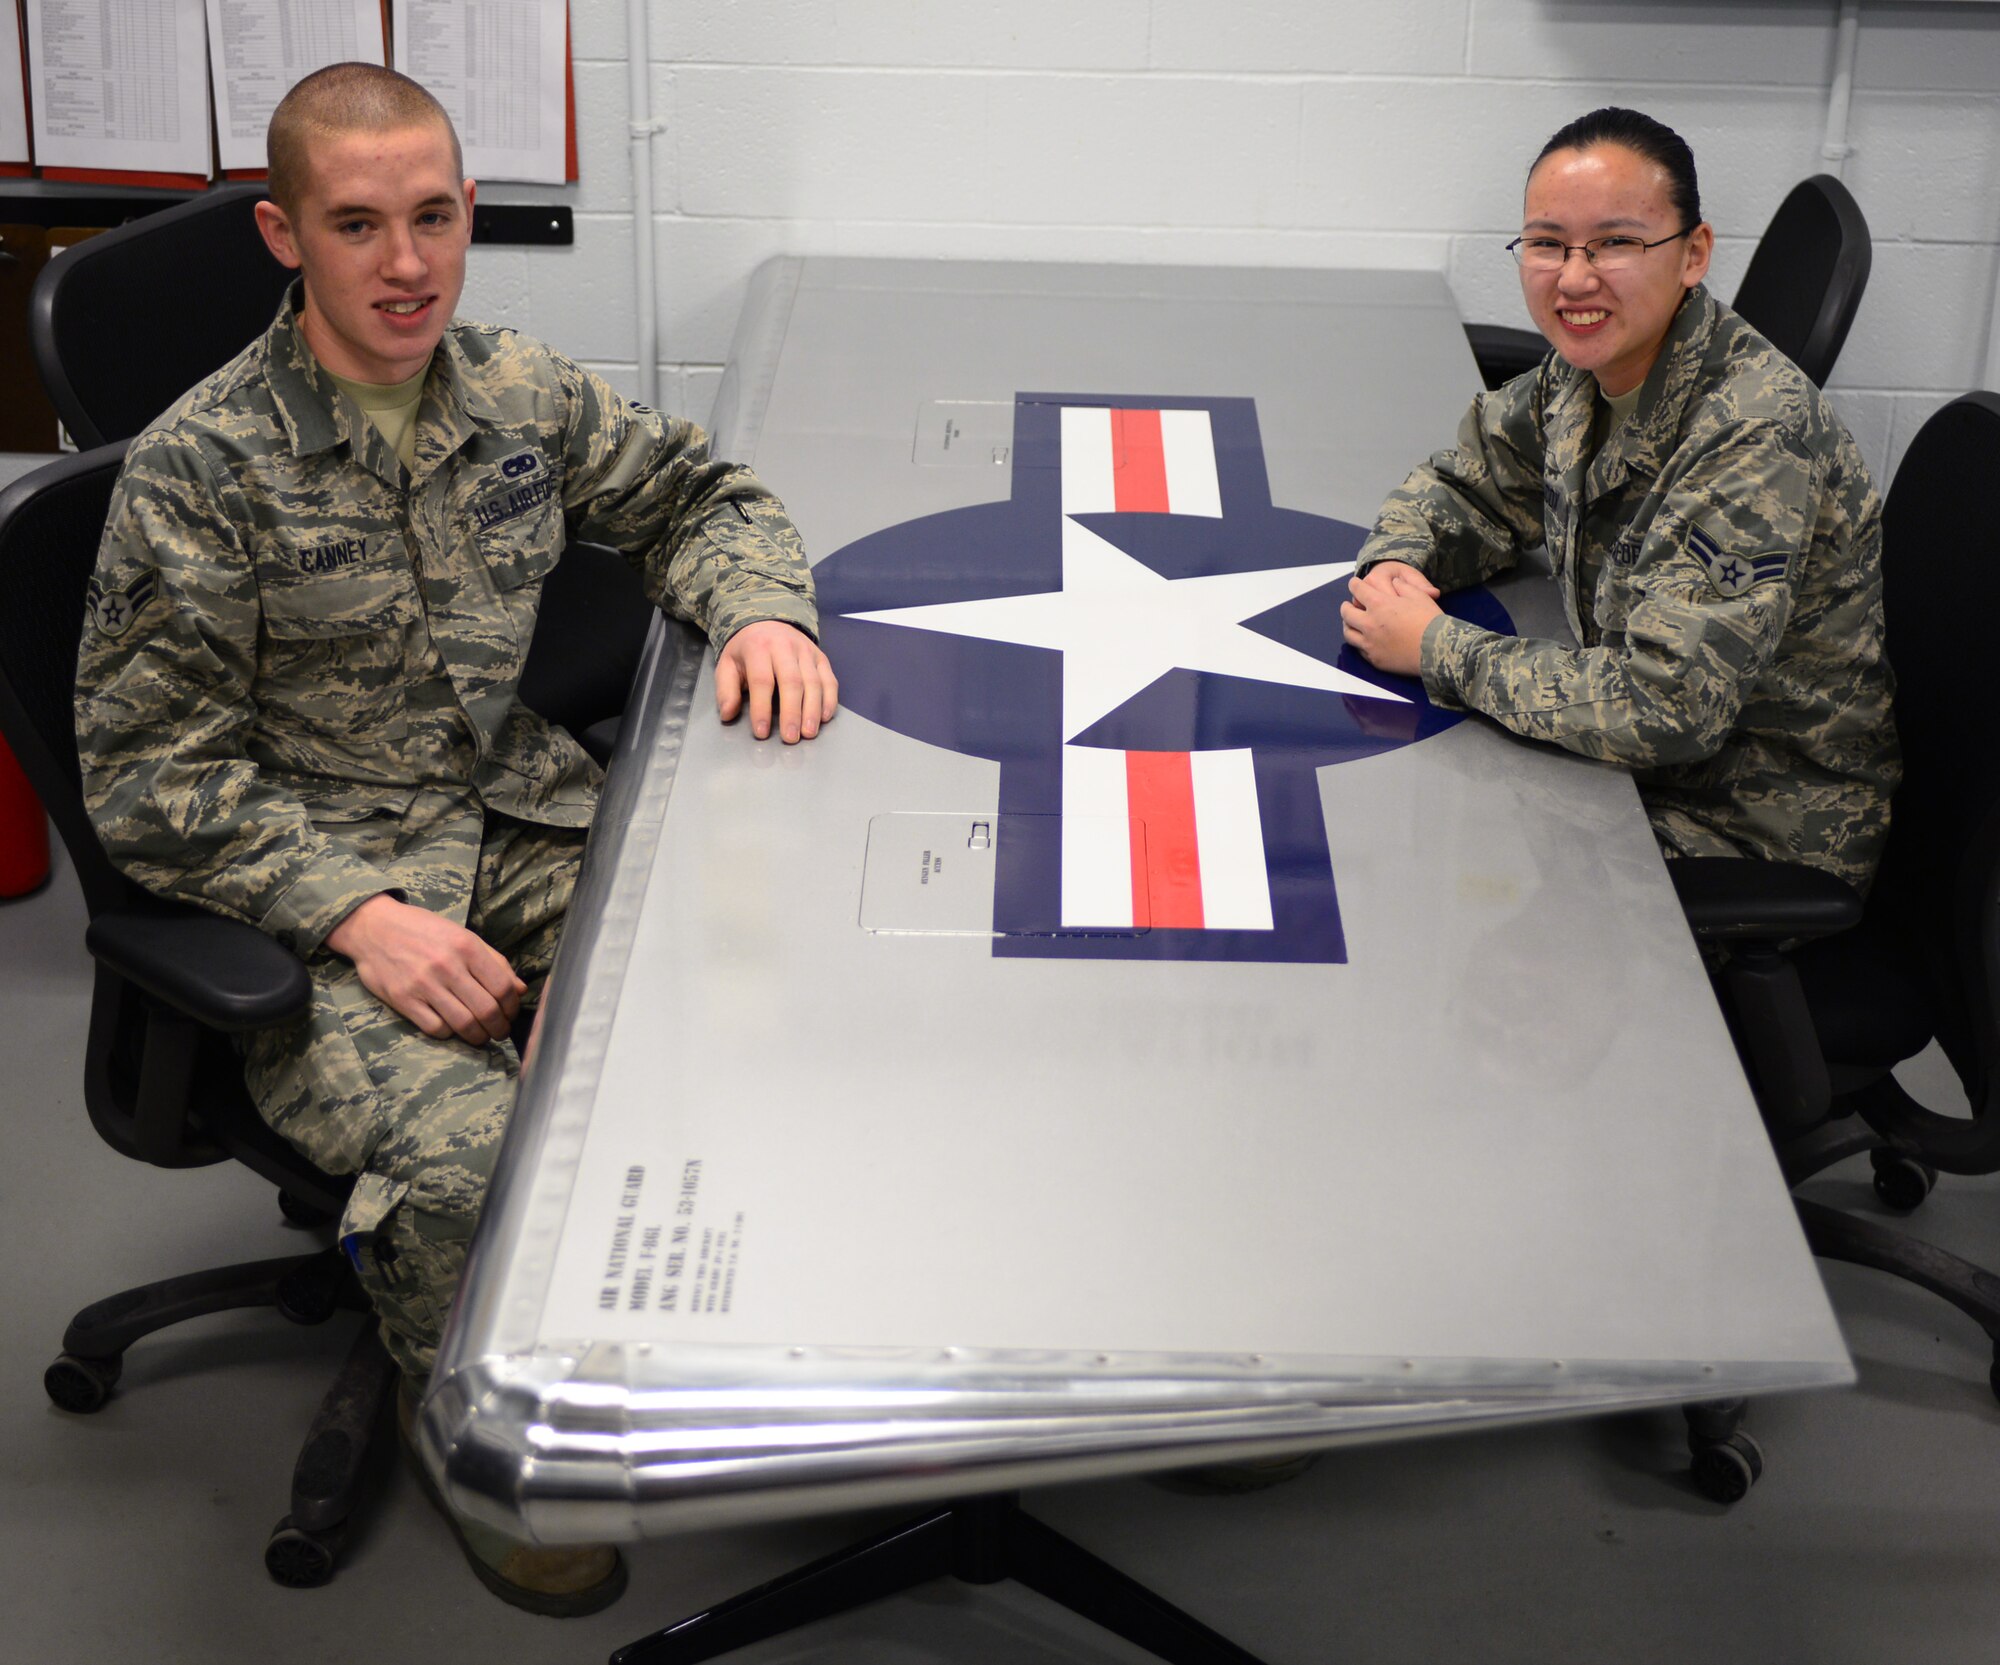 New Hampshire Air National Guard Airman First Class Kevin Canney (left) and Airman First Class Margaret Wilcox, both aircraft structural maintenance apprentices with the 157th Maintenance Group, sit at the aircraft wing shaped table they designed, built and painted March 24, 2015 Pease Air National Guard Base, N.H. They made the table to practice the skills they learned in technical school before working on actual aircraft. (New Hampshire Air National Guard photo by Airman Ashlyn J. Correia/RELEASED)